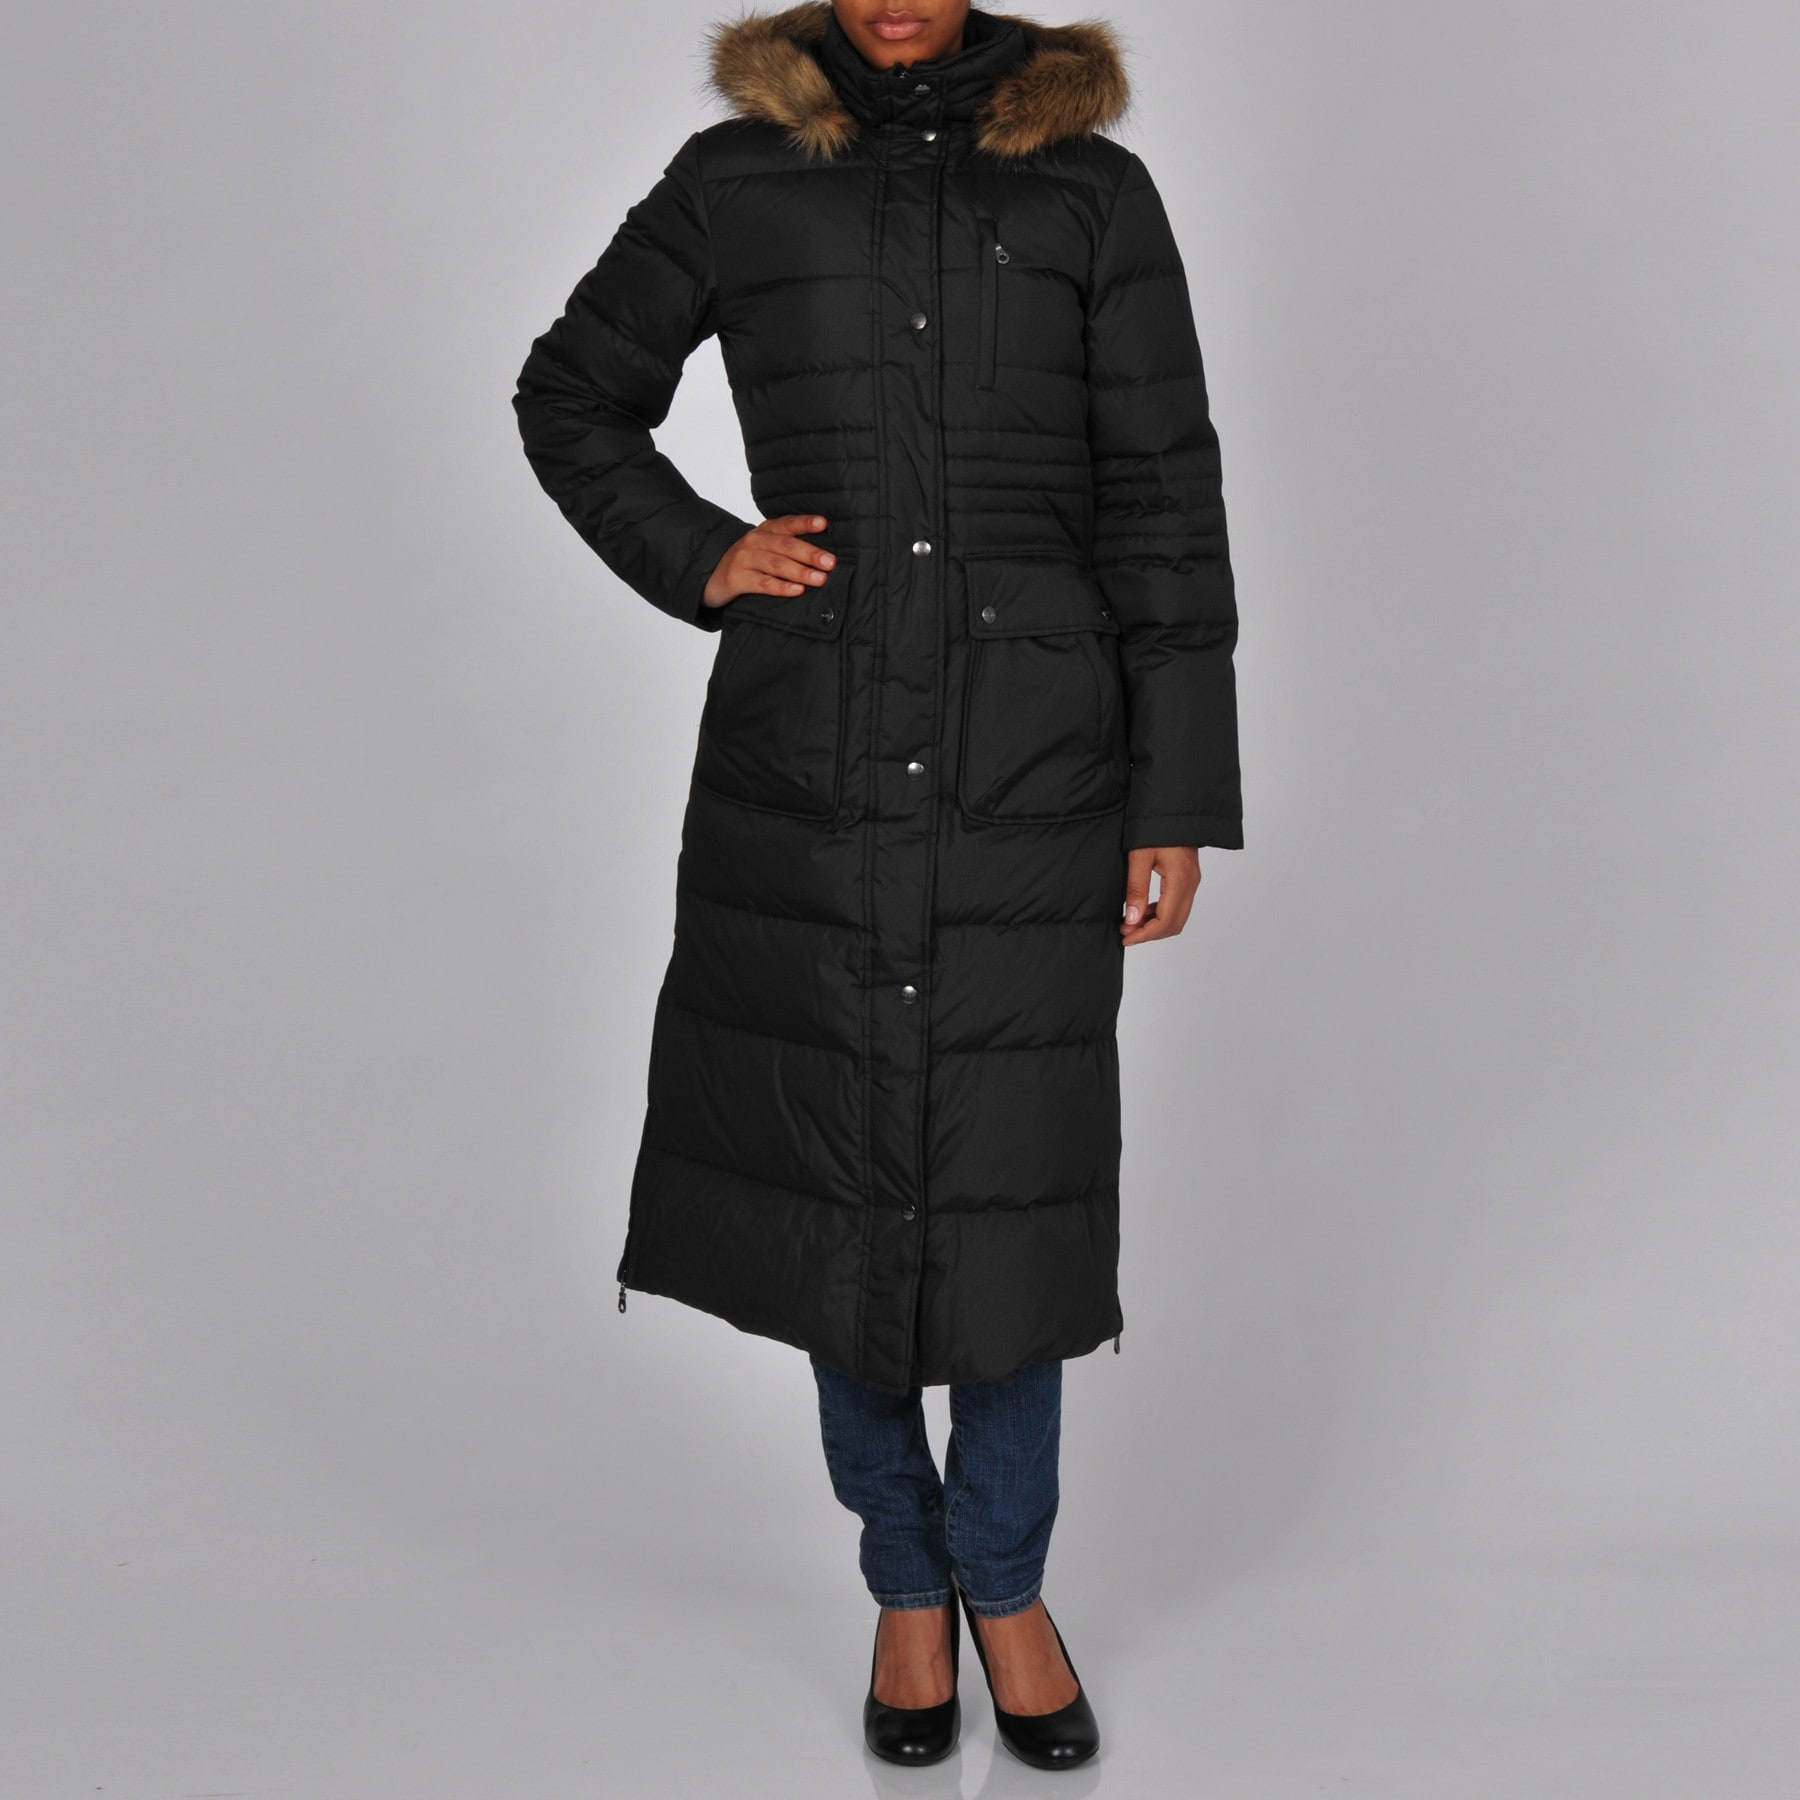 Shop DKNY Women's Black Quilted Down Full-length Zip-front Hooded Coat ...